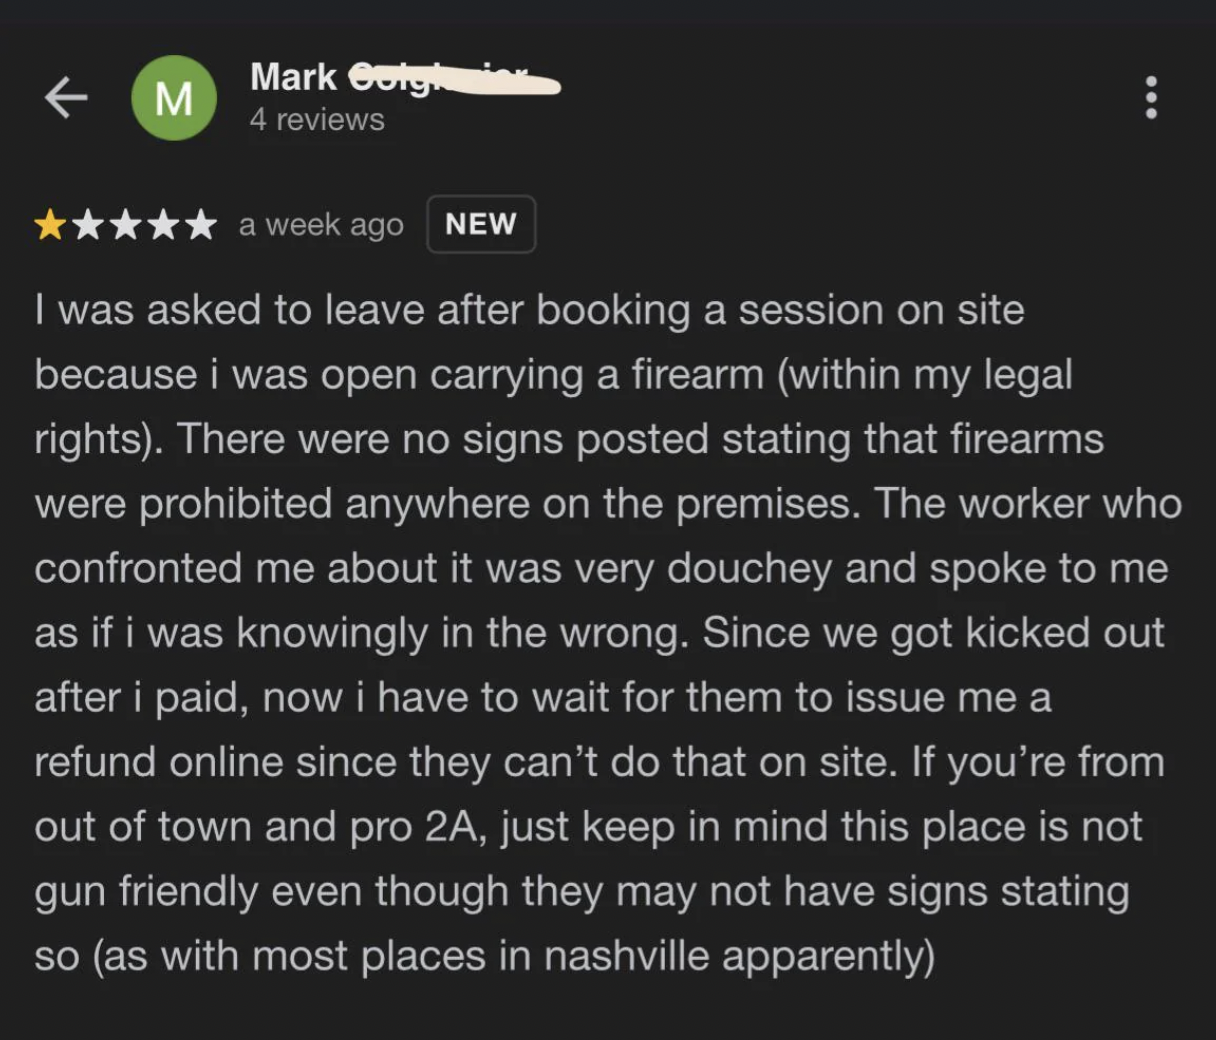 screenshot - M Mark Gorghin 4 reviews a week ago New I was asked to leave after booking a session on site because i was open carrying a firearm within my legal rights. There were no signs posted stating that firearms were prohibited anywhere on the premis